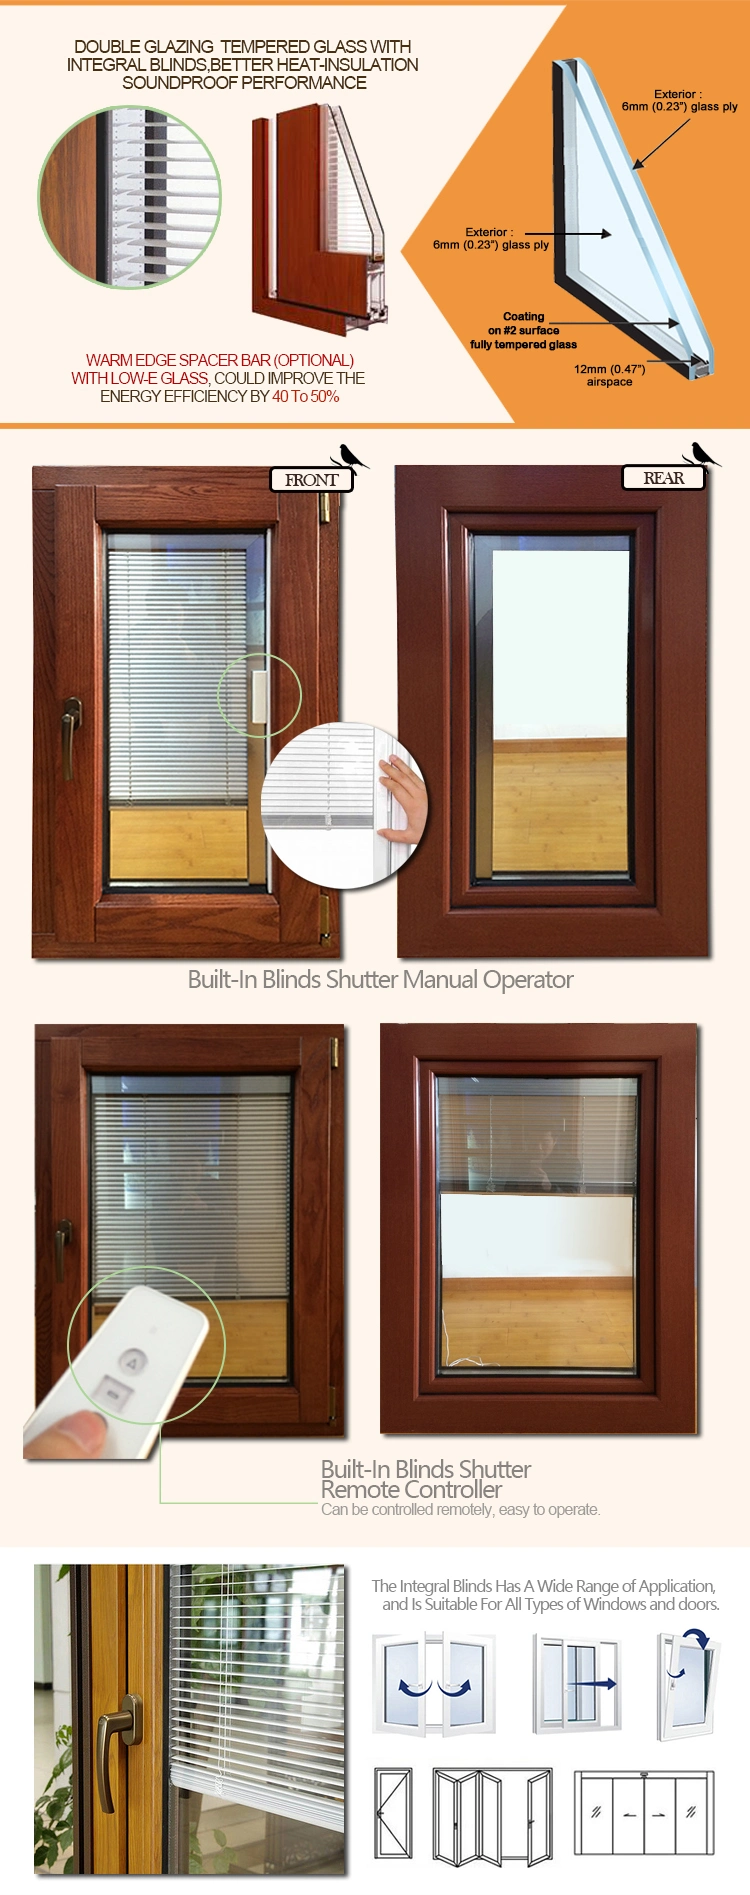 America Oak Wood Casement Window with Electrical Operated Blinds, Selected Pure Solid Wood Profiles Tilt Window